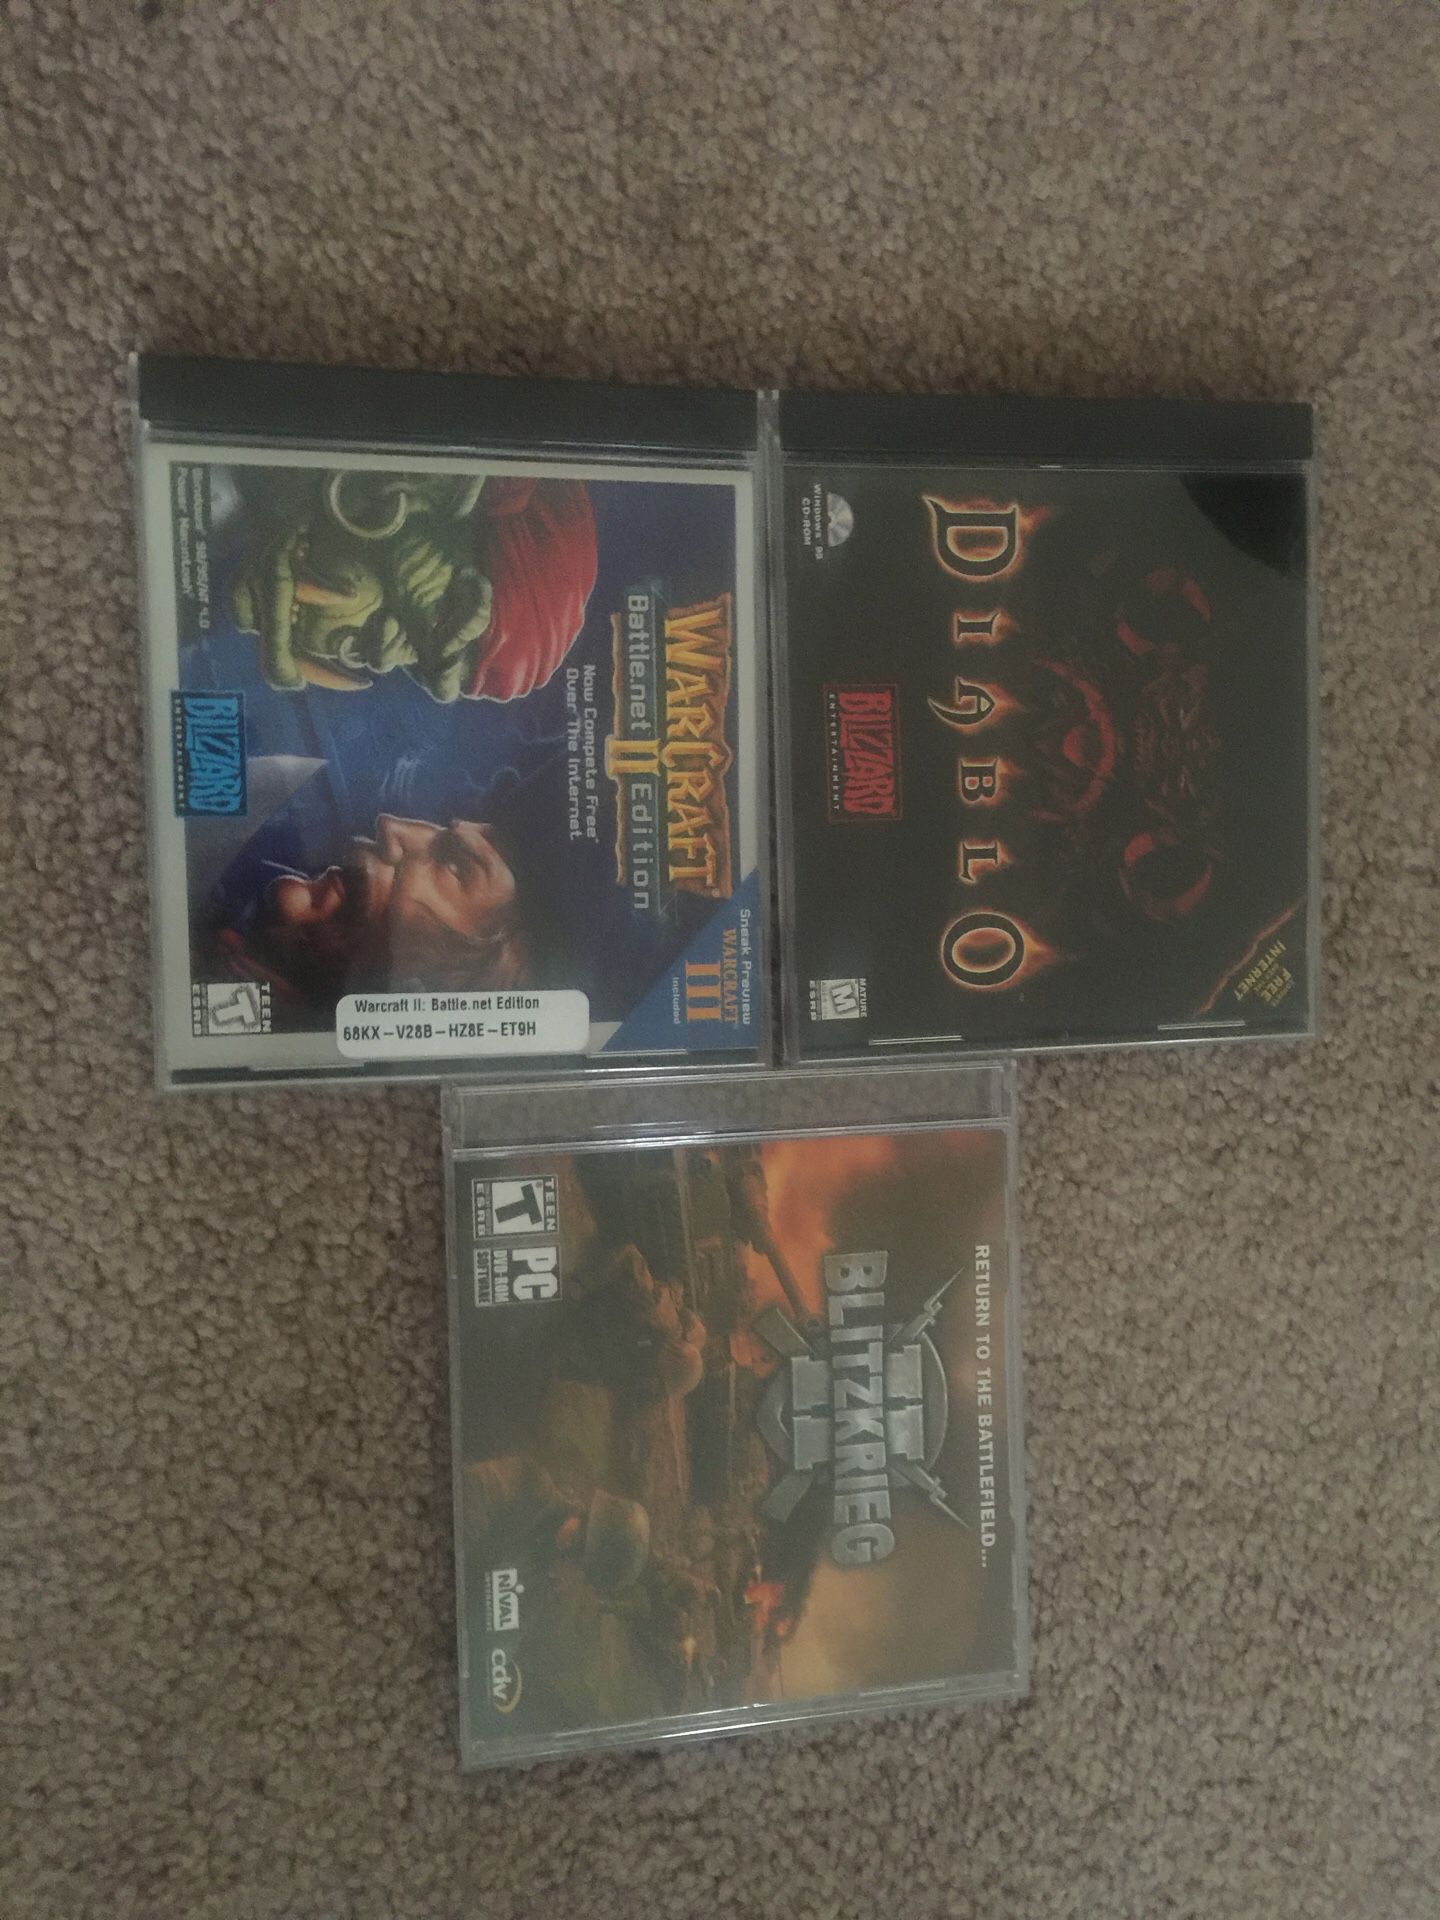 3 pc games